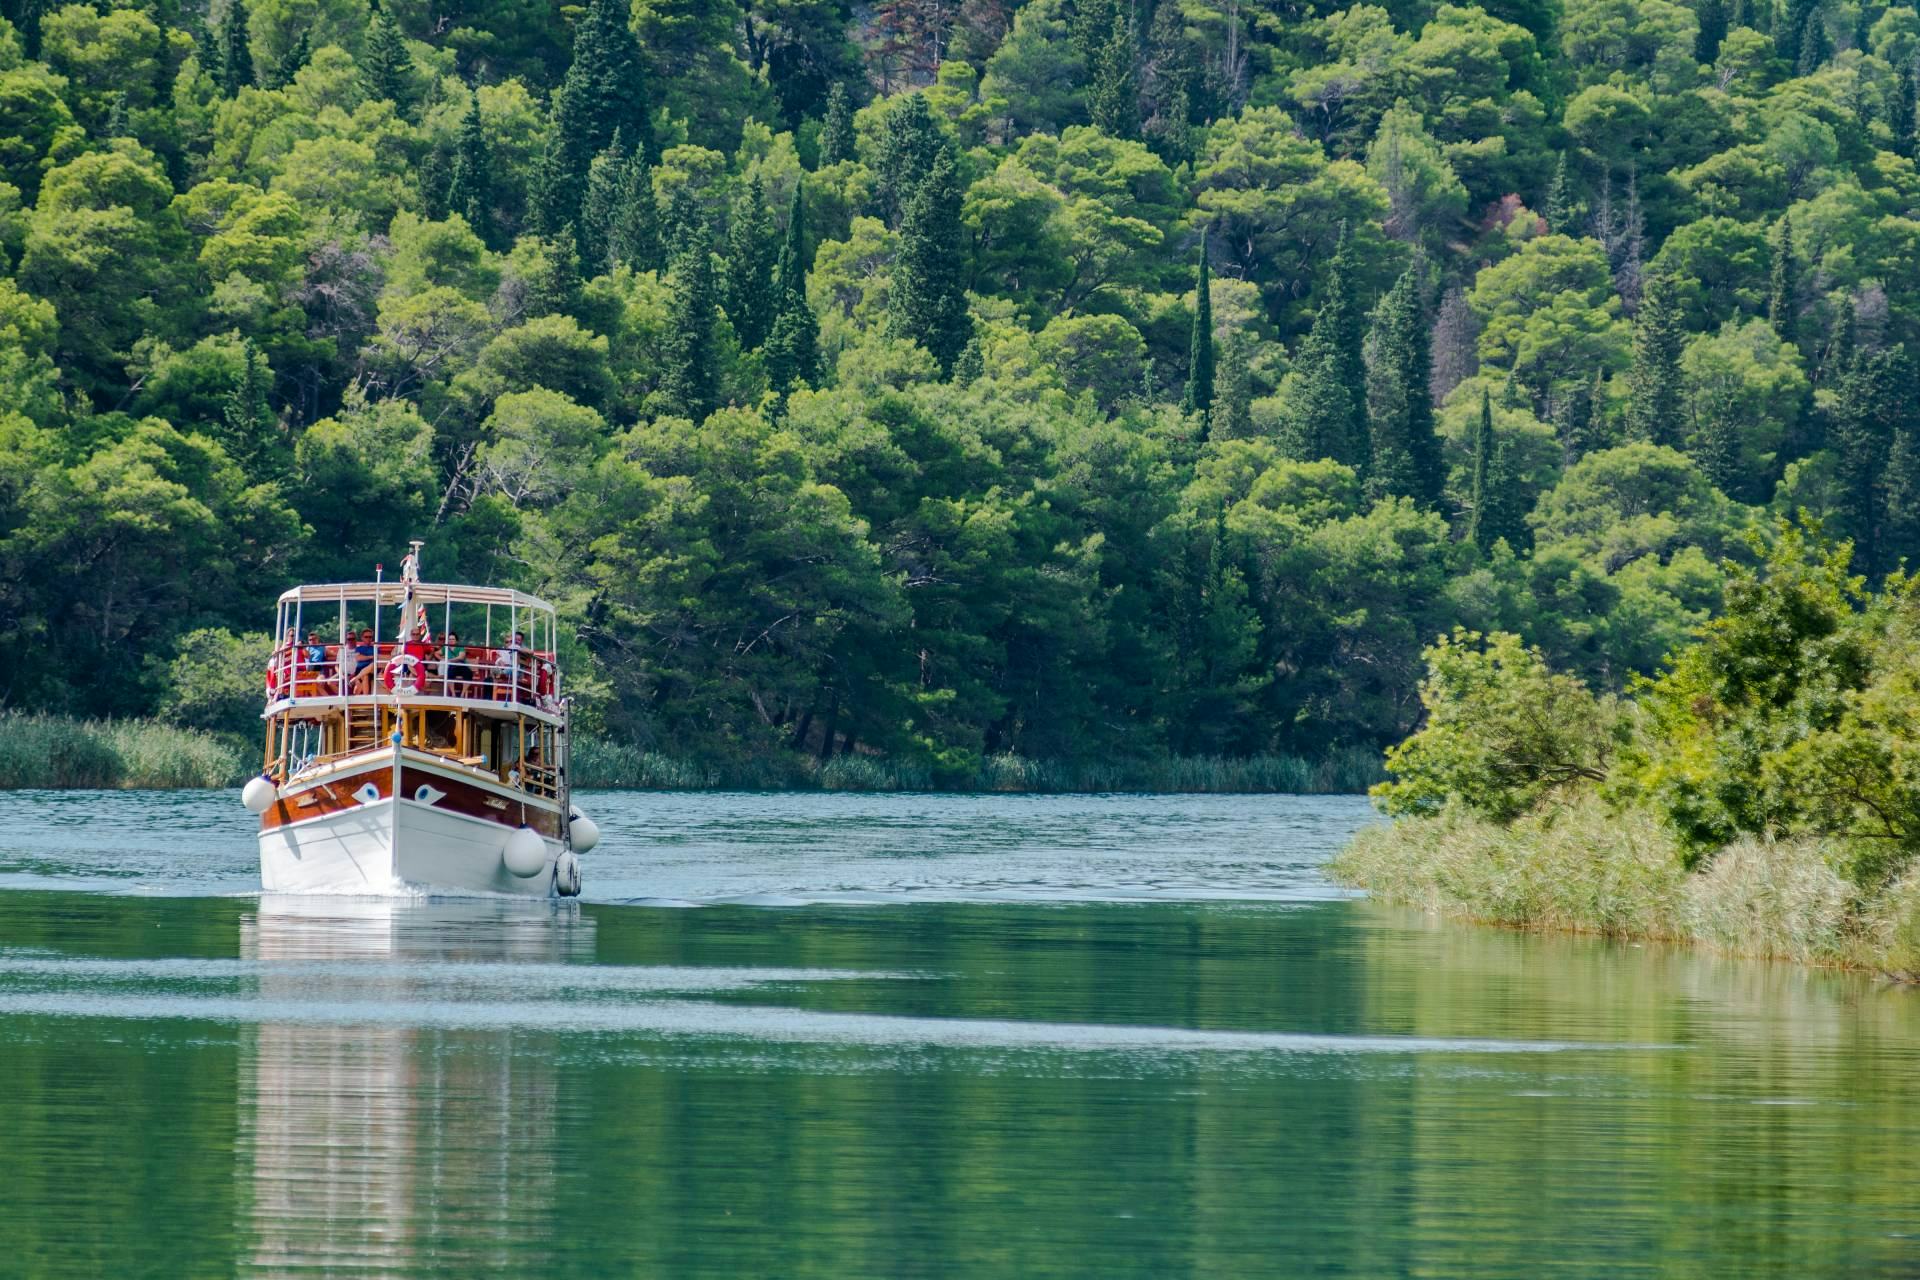 After a short ride from Split (around 75min), Skradin is our point of entrance to Krka. Relax while your guide gets the tickets without waiting in line. From there we will take a 25 min boat ride with a spectacular view!